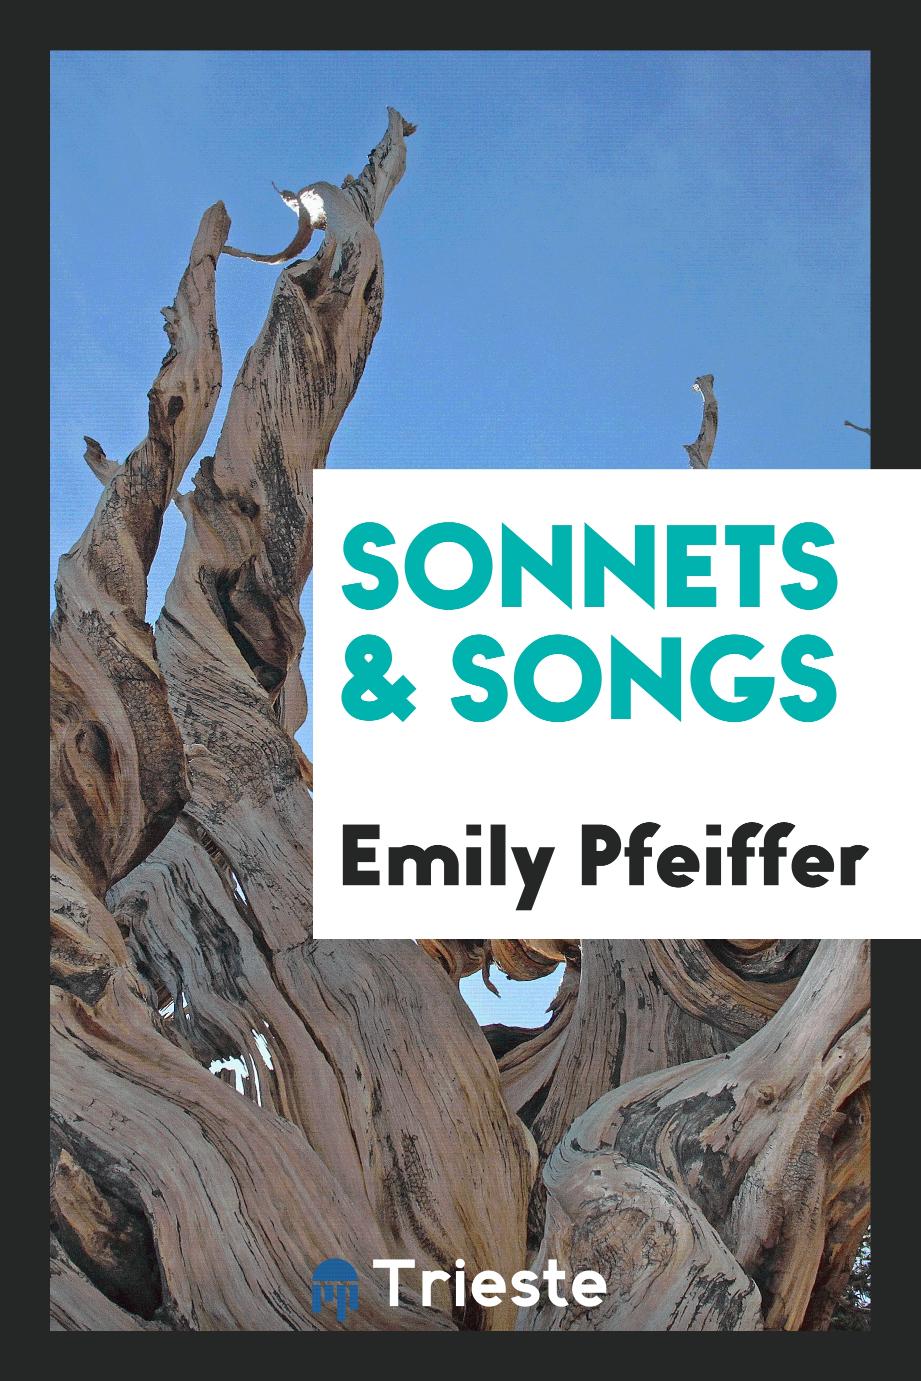 Sonnets & Songs